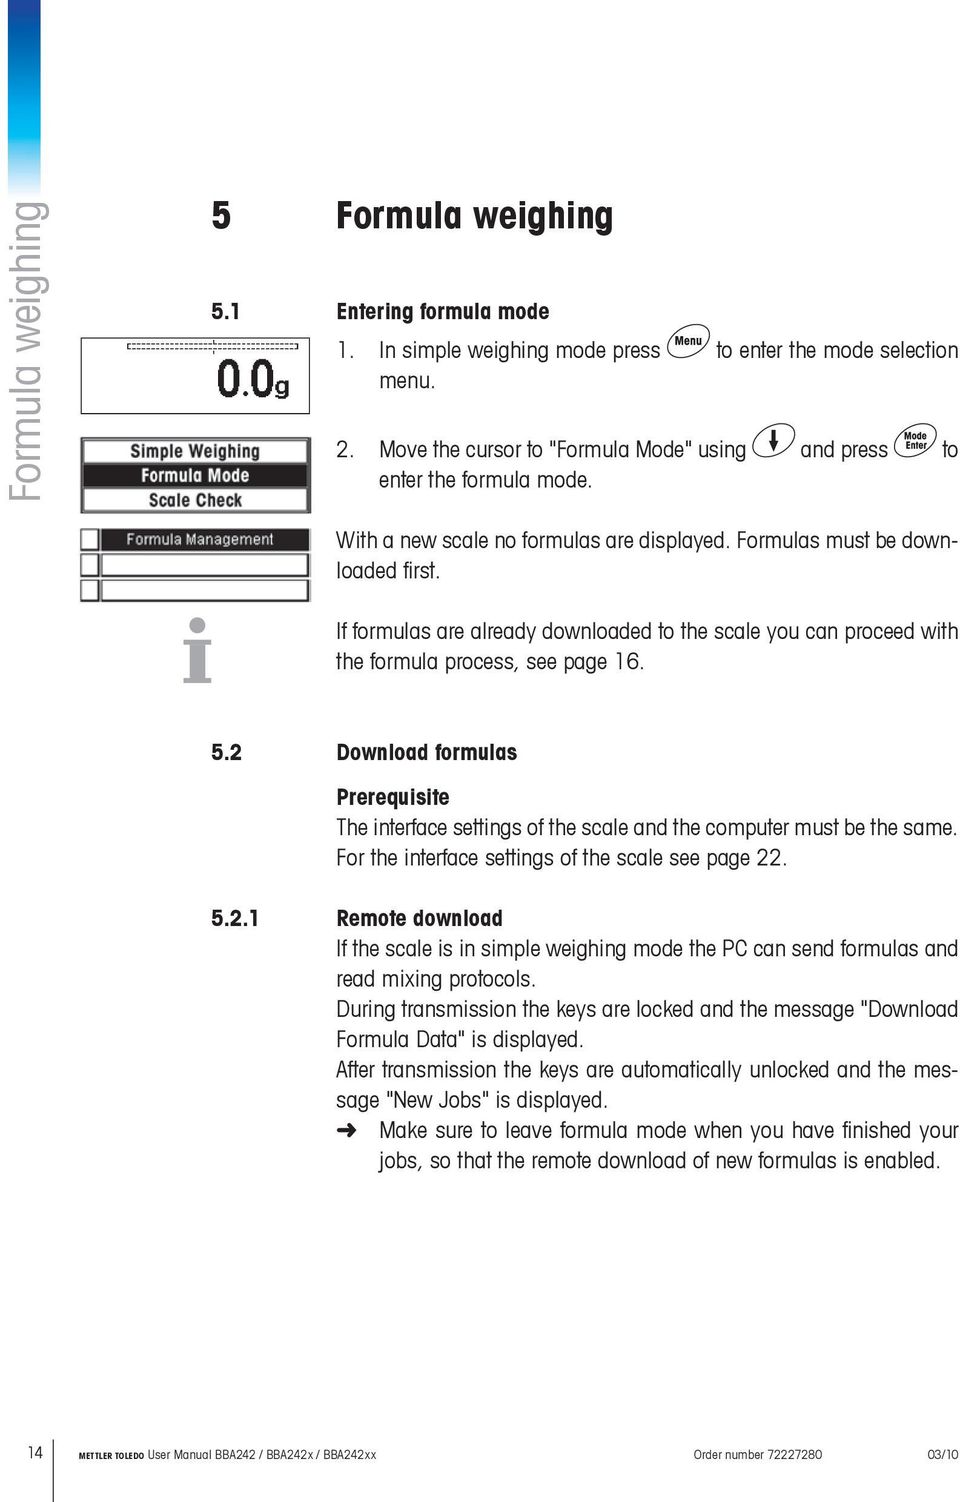 If formulas are already downloaded to the scale you can proceed with the formula process, see page 16. 5.